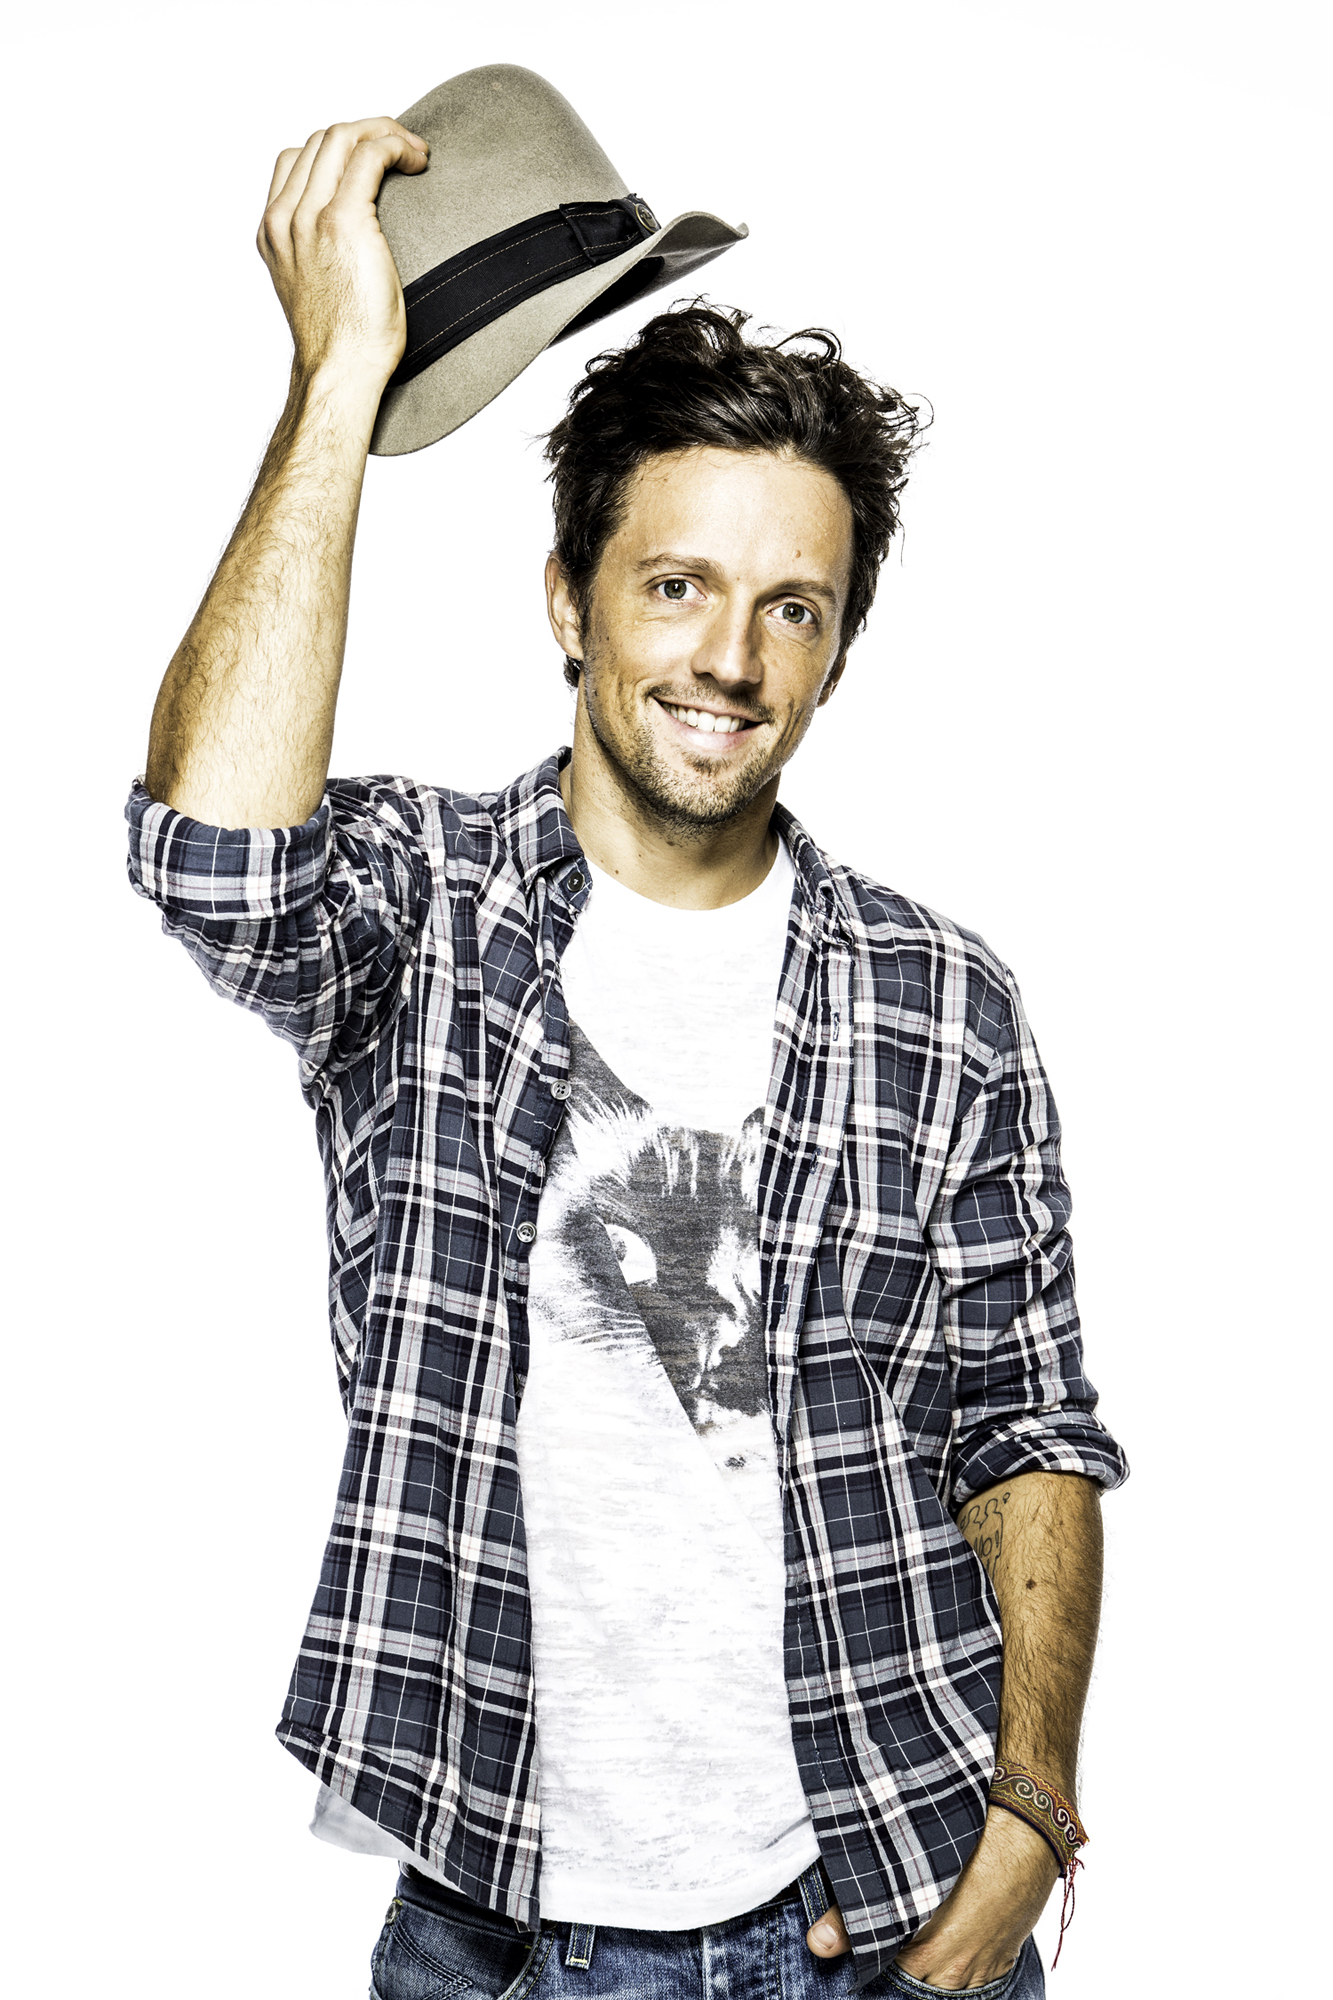 Grammy winner Jason Mraz plays acoustic 'Live in Stereo' concert at